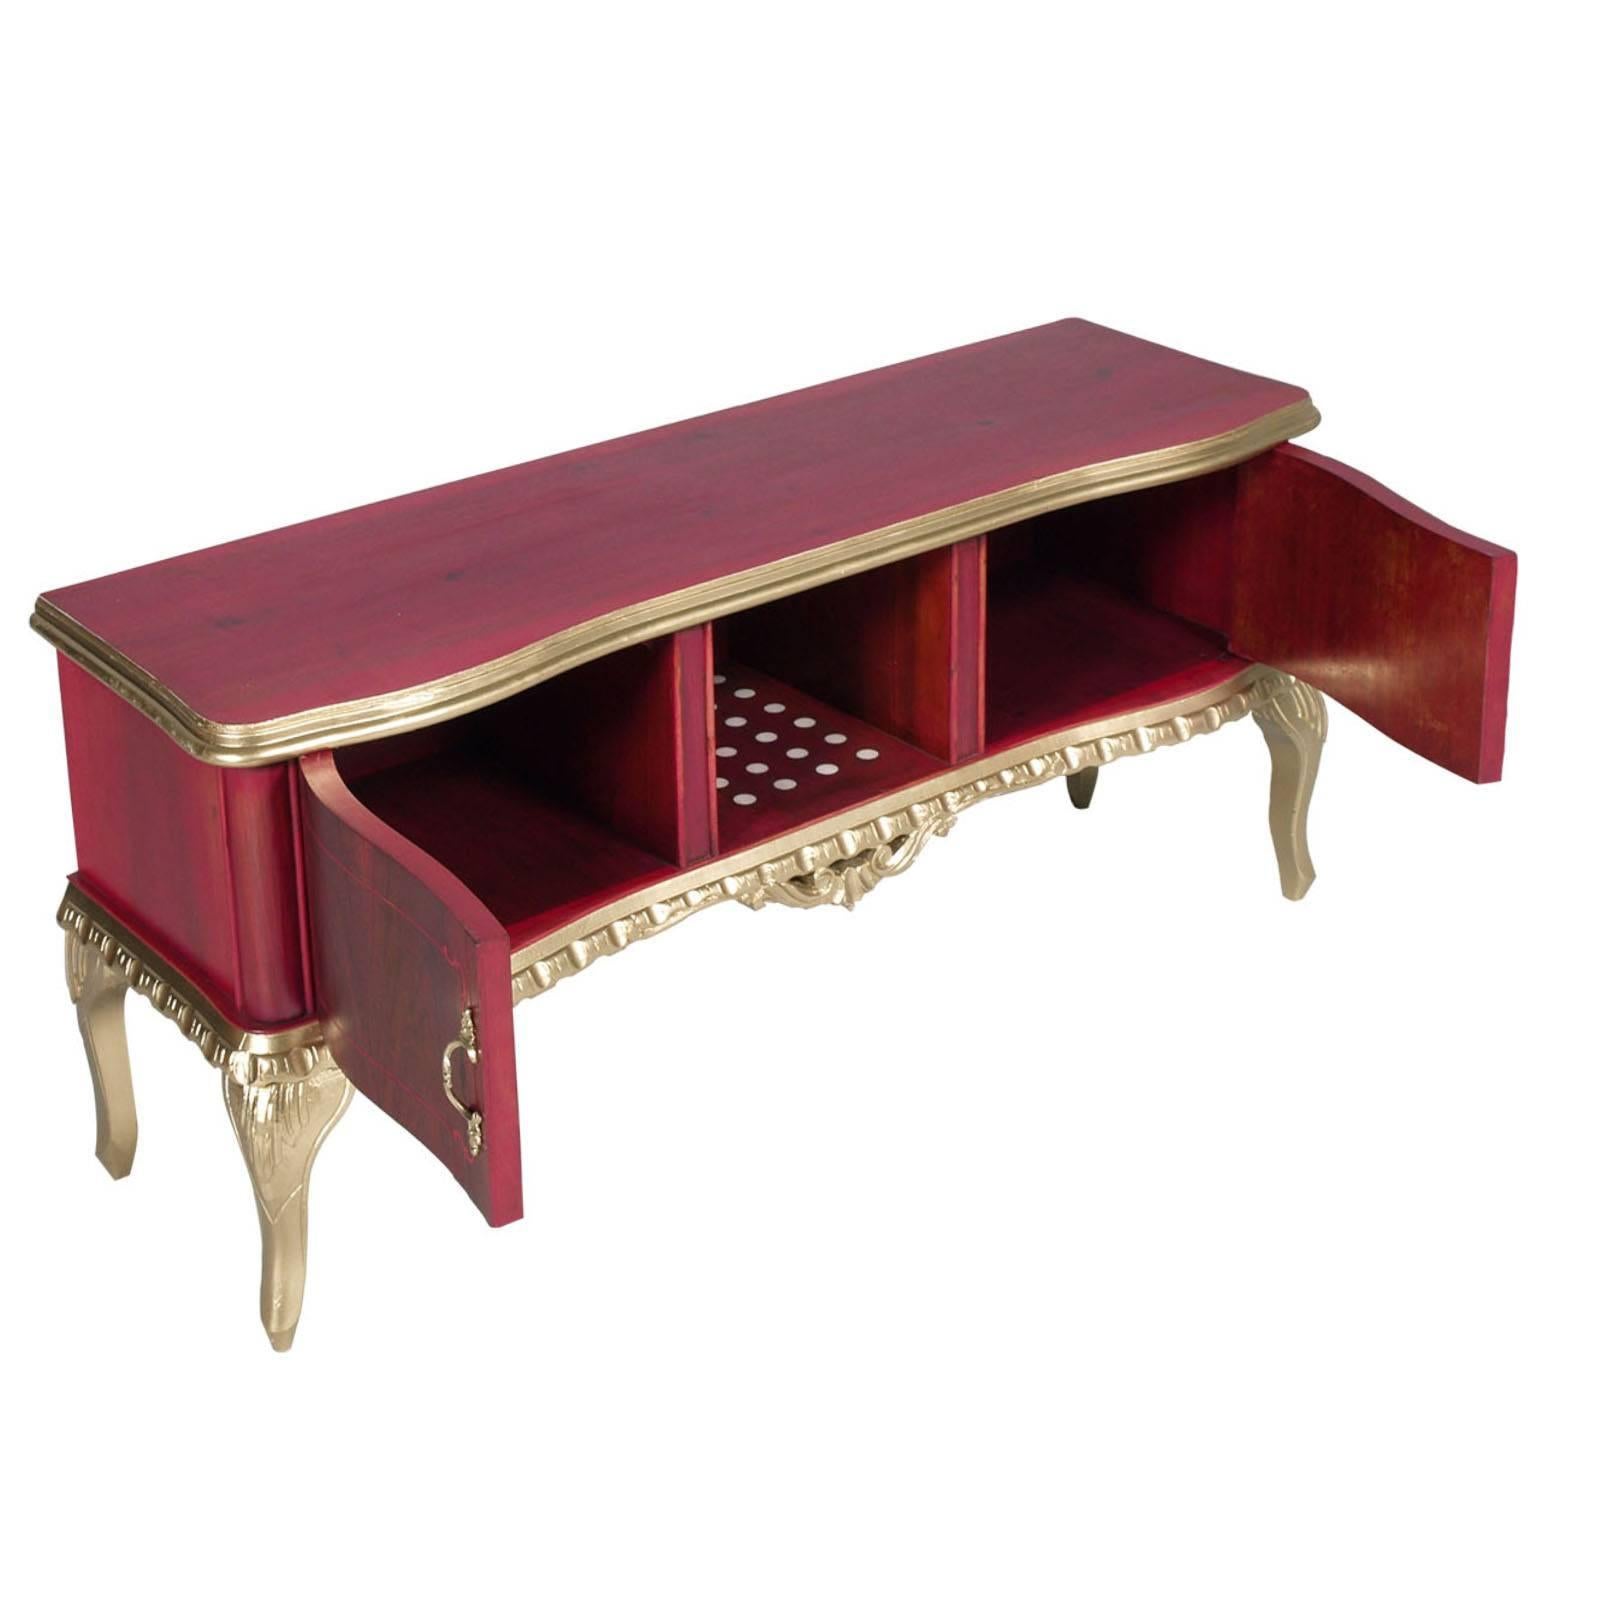 Beginning 20th century low Venetian Baroque console in carved gold walnut, veneer walnut and burl walnut with inlay thread. Cabinet color fuchsia  with two closed compartments and open central illuminated part. 
Mobile suitable as a TV